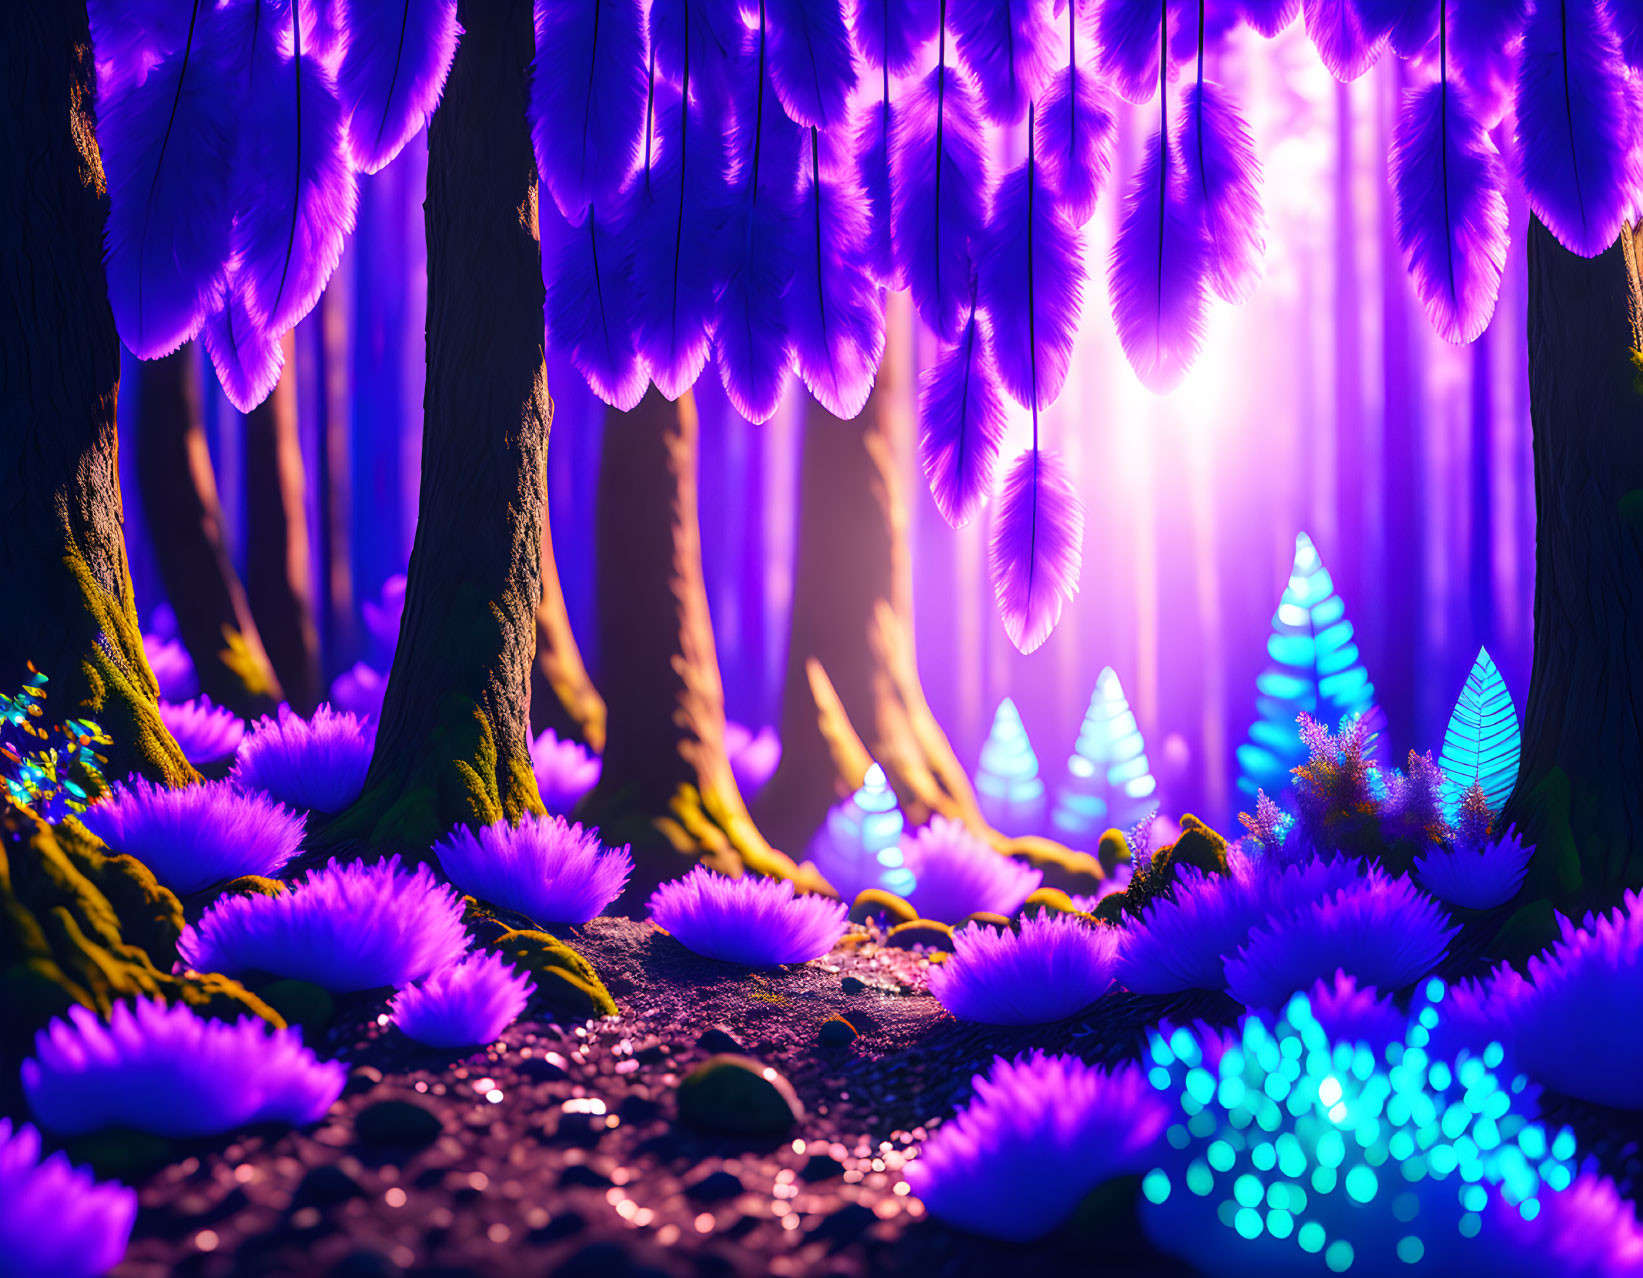 Vibrant neon-lit fantasy forest with purple foliage and glowing plants